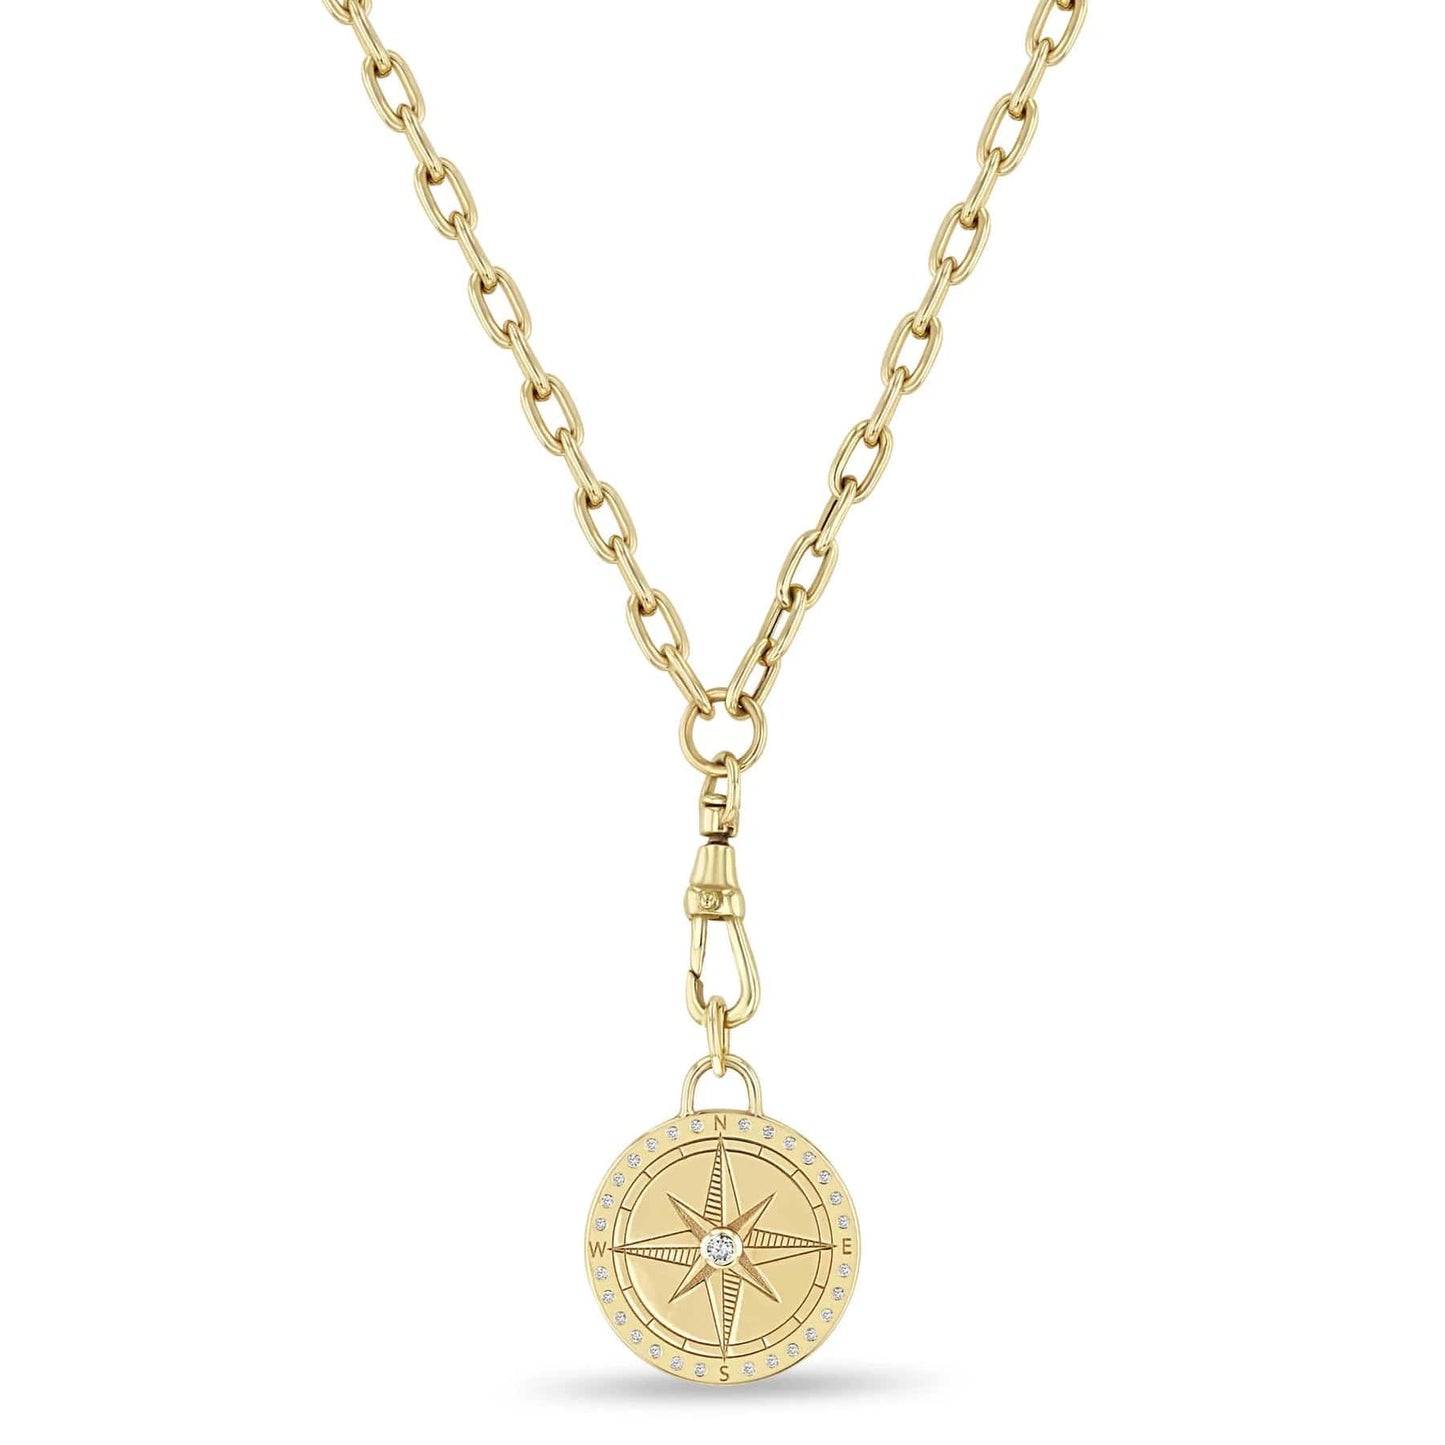 NKL-14K 14k Medium Compass Medallion Square Oval Chain with Fob Clasp Necklace